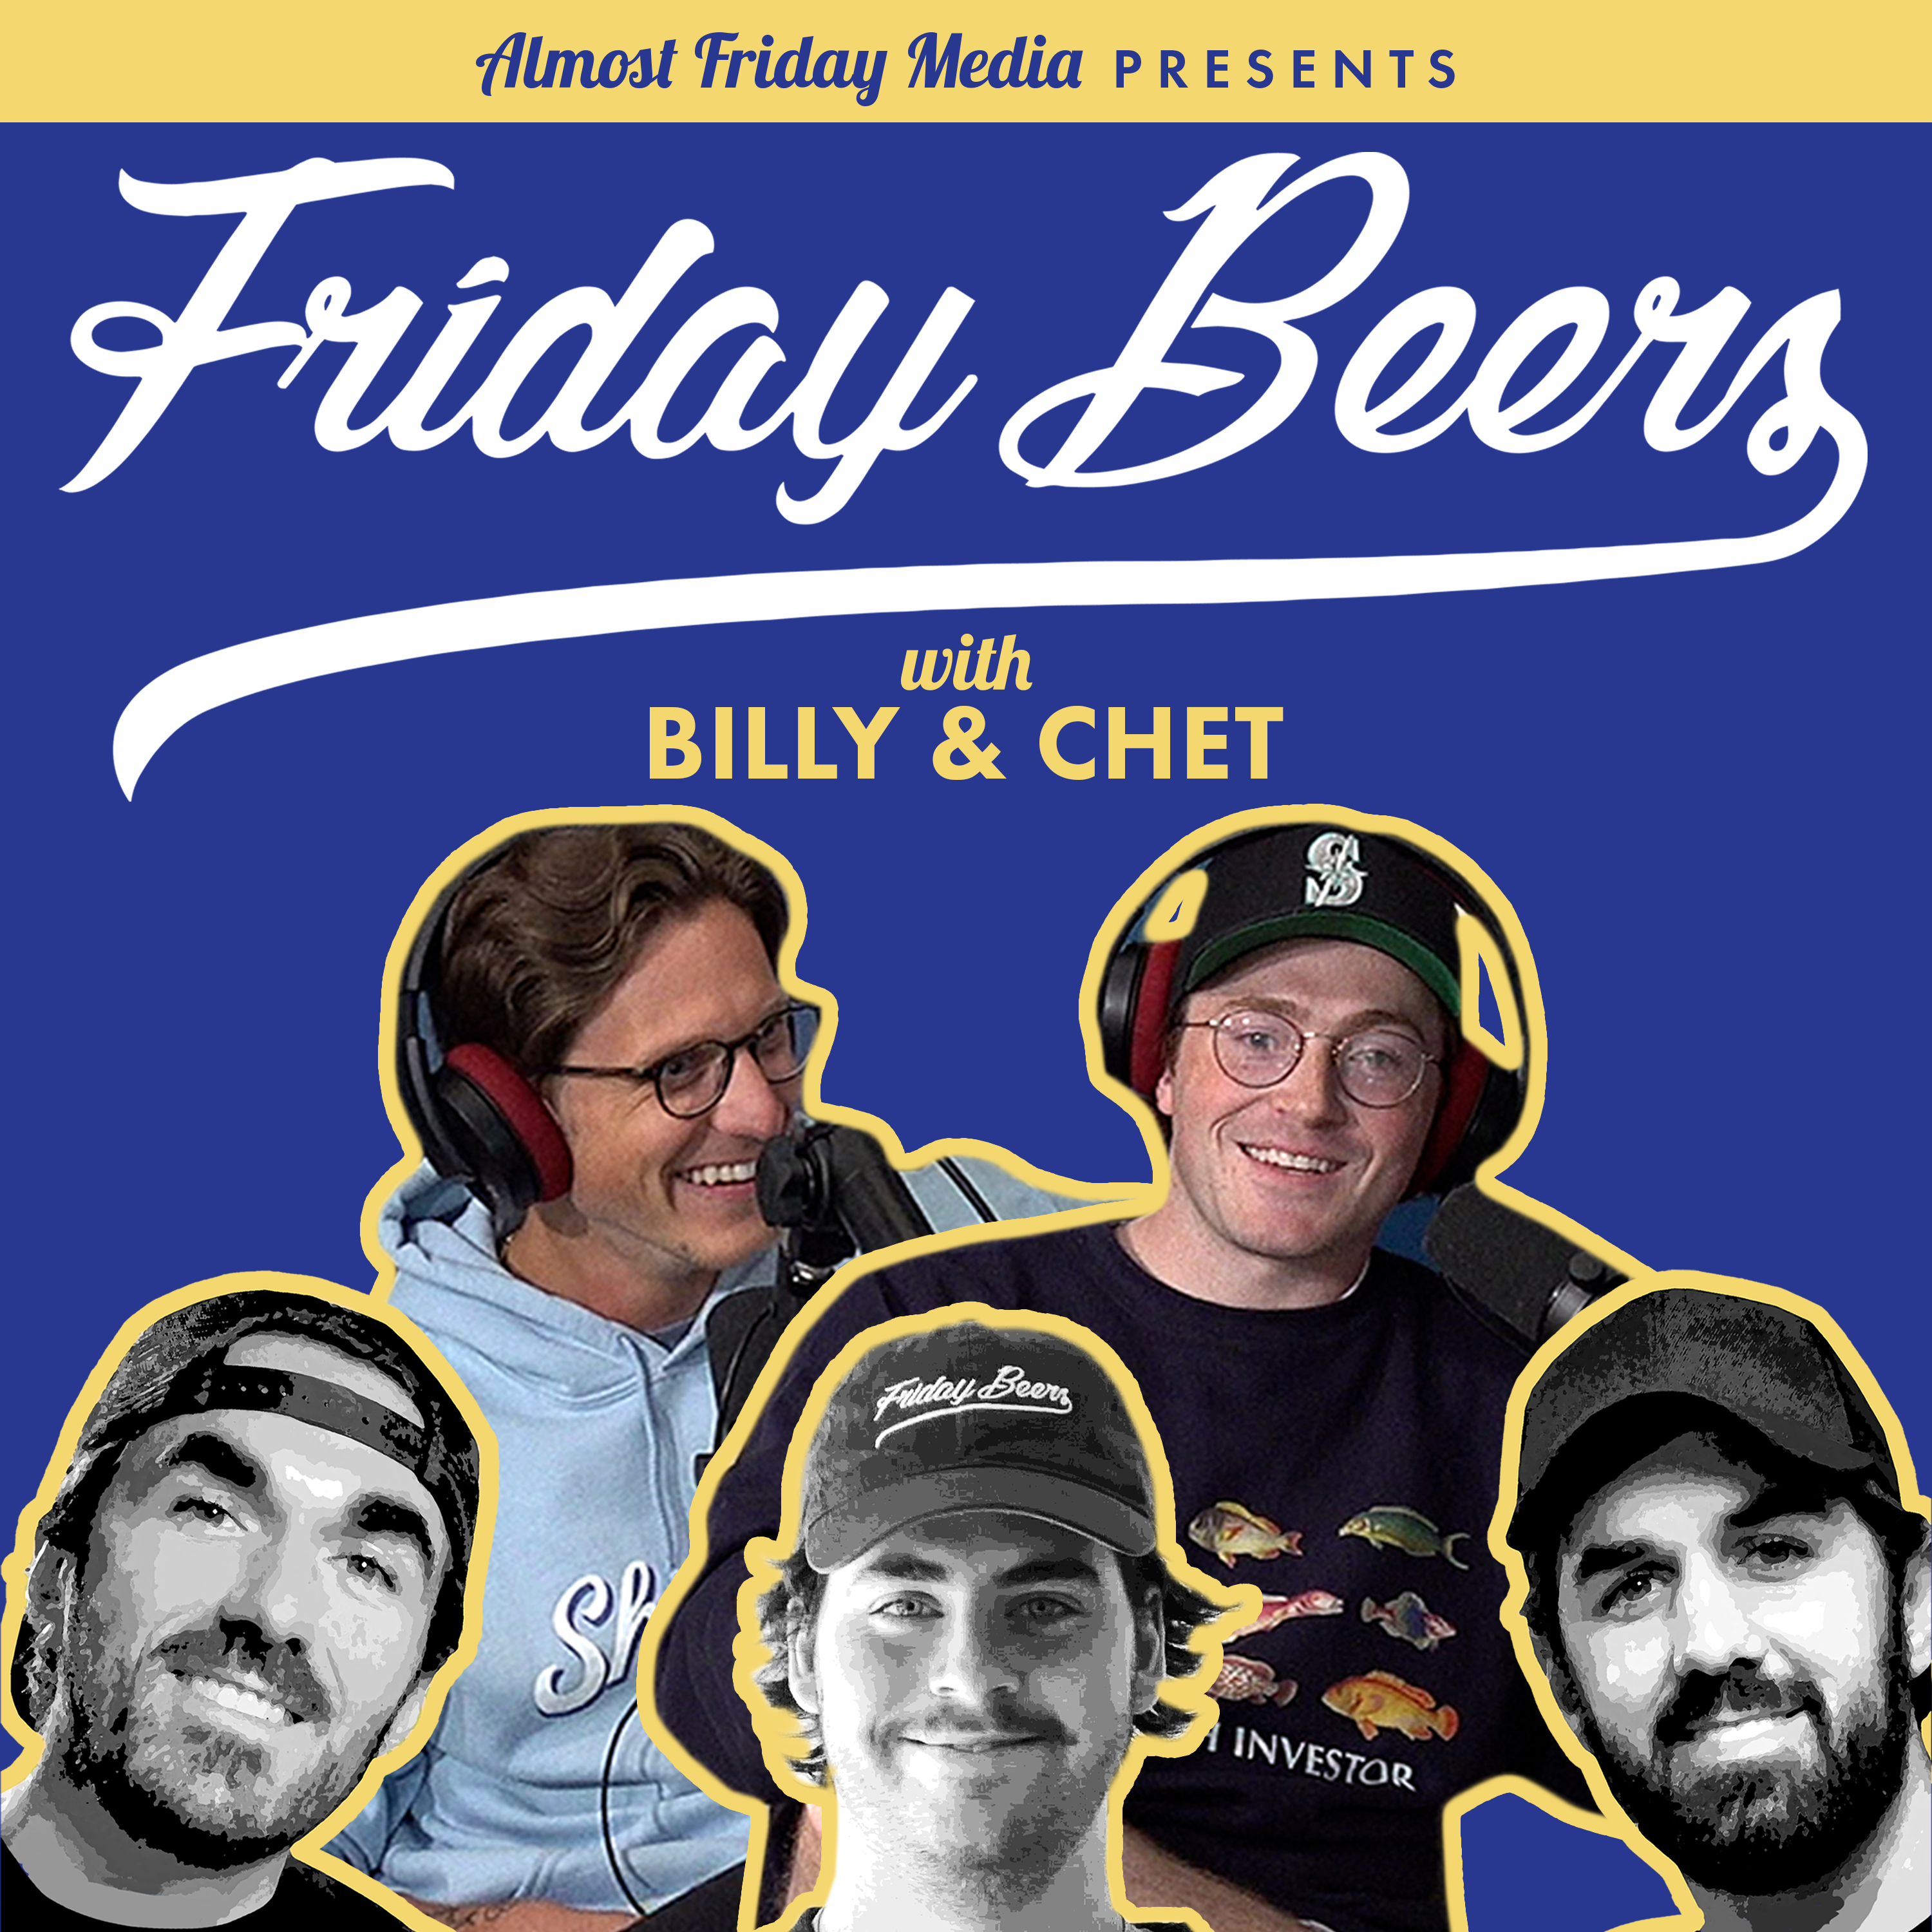 Billy and Chet: Comedic Origins, Early TikTok Days, Friday Beers Hype House